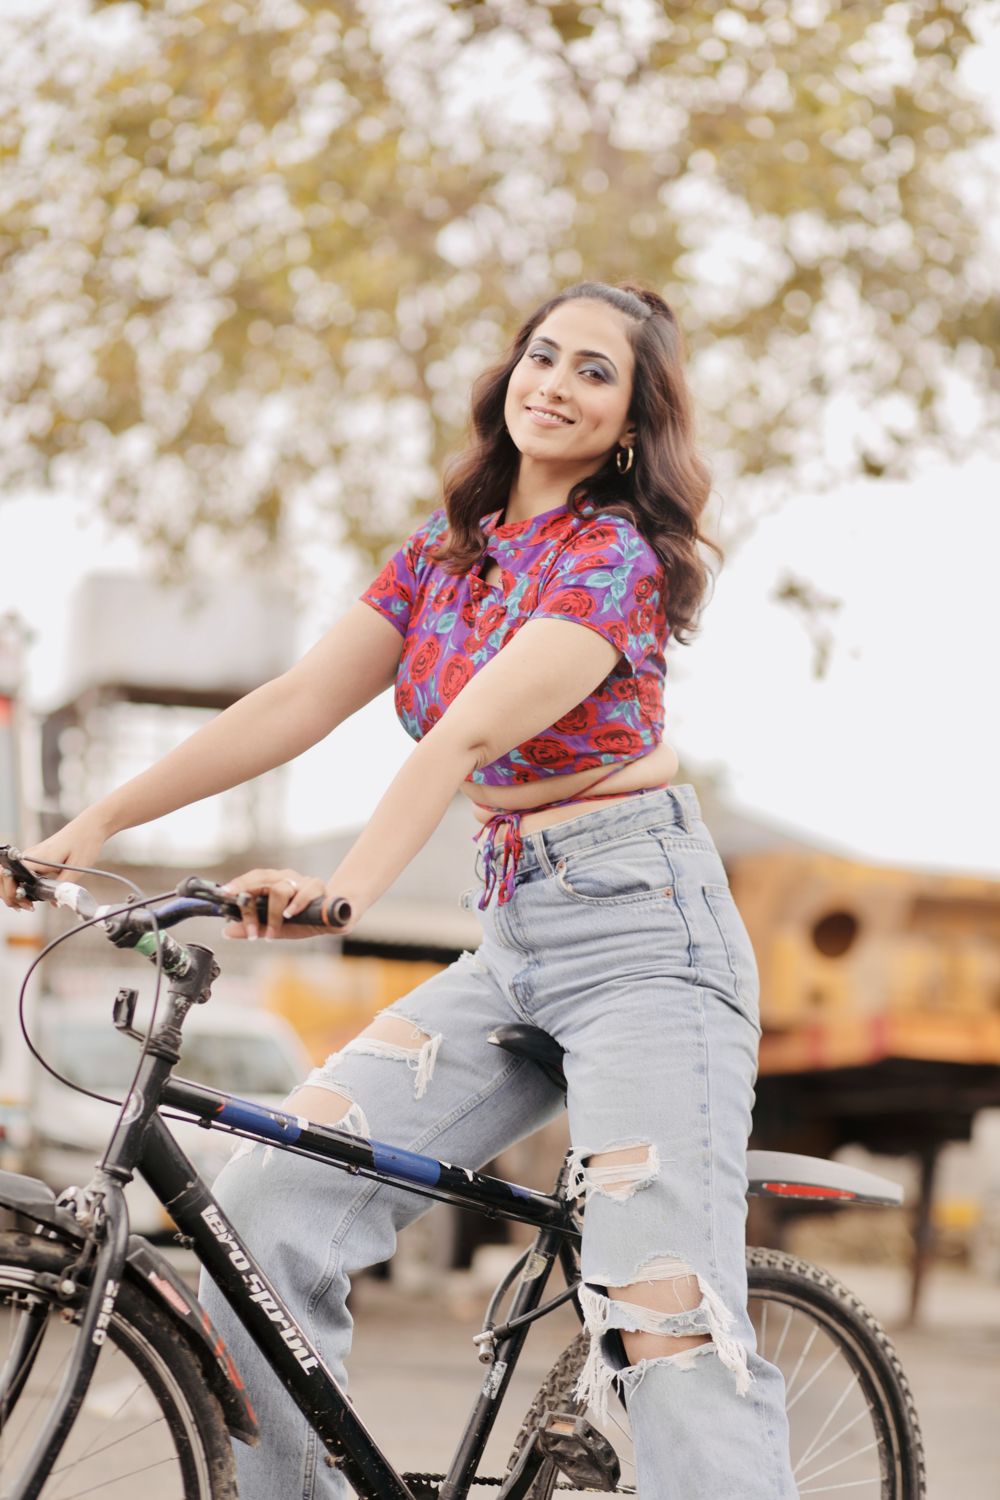 On World Bicycle Day, avid cyclists from the Chandigarh share why they love the experience and also their favourite routes